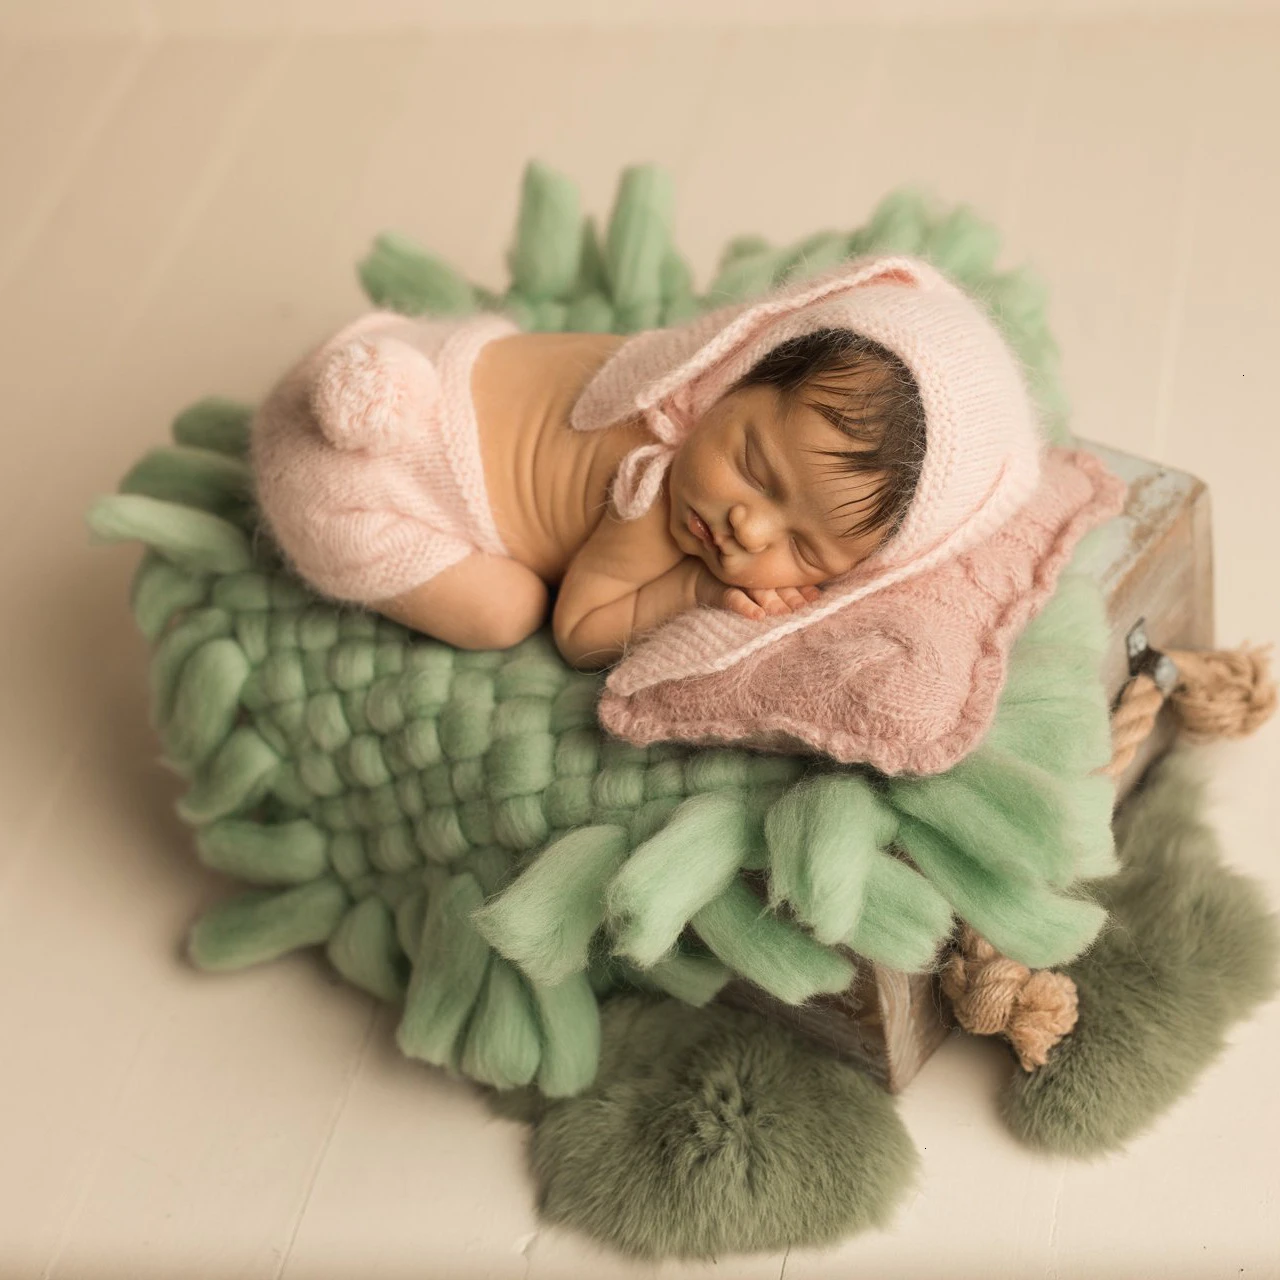 Newborn Photography Knitted Thick Blanket Baby Photo Square Blankets Studio Infant Shooting Props Accessories Basket Filling Pad